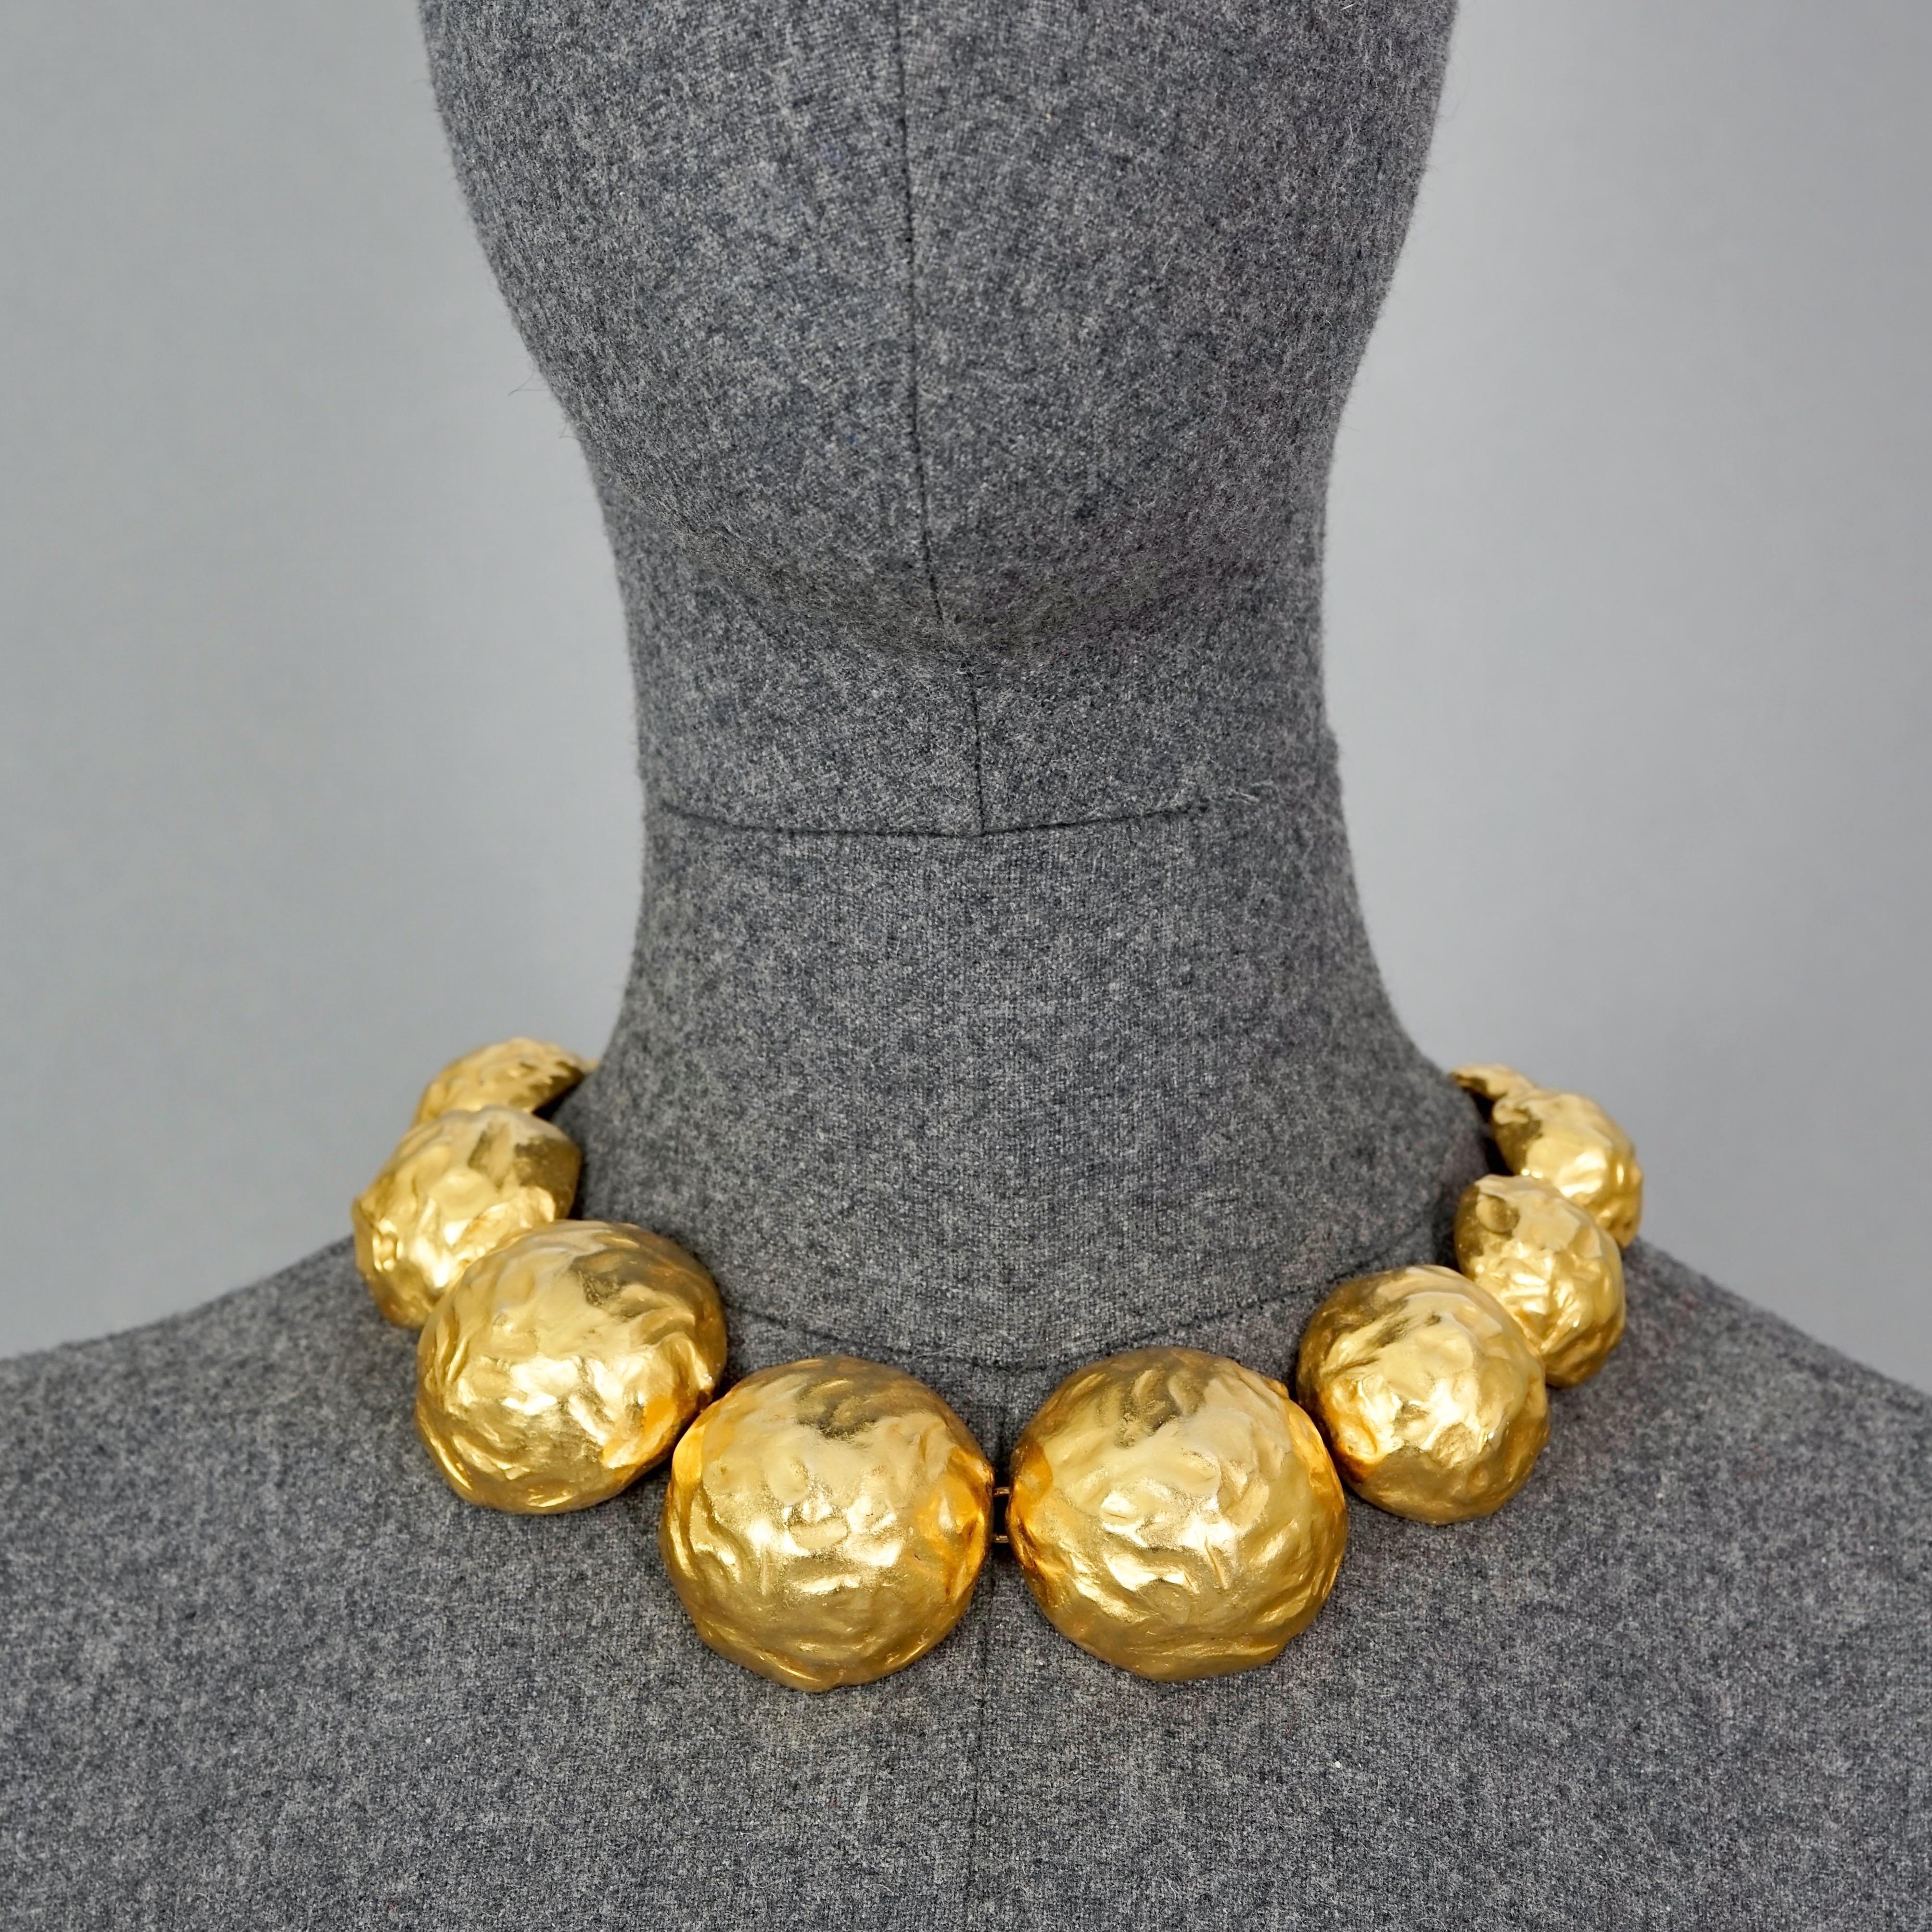 Vintage EDOUARD RAMBAUD Hammered Demi Sphere Link Necklace

Measurements:
Height: 17.71 inches (45 m)
Wearable Length: 14.56 inches to 16.92 cm (37 cm to 43 cm) adjustable

Features:
- 100% Authentic EDOUARD RAMBAUD.
- Hammered demi sphere link